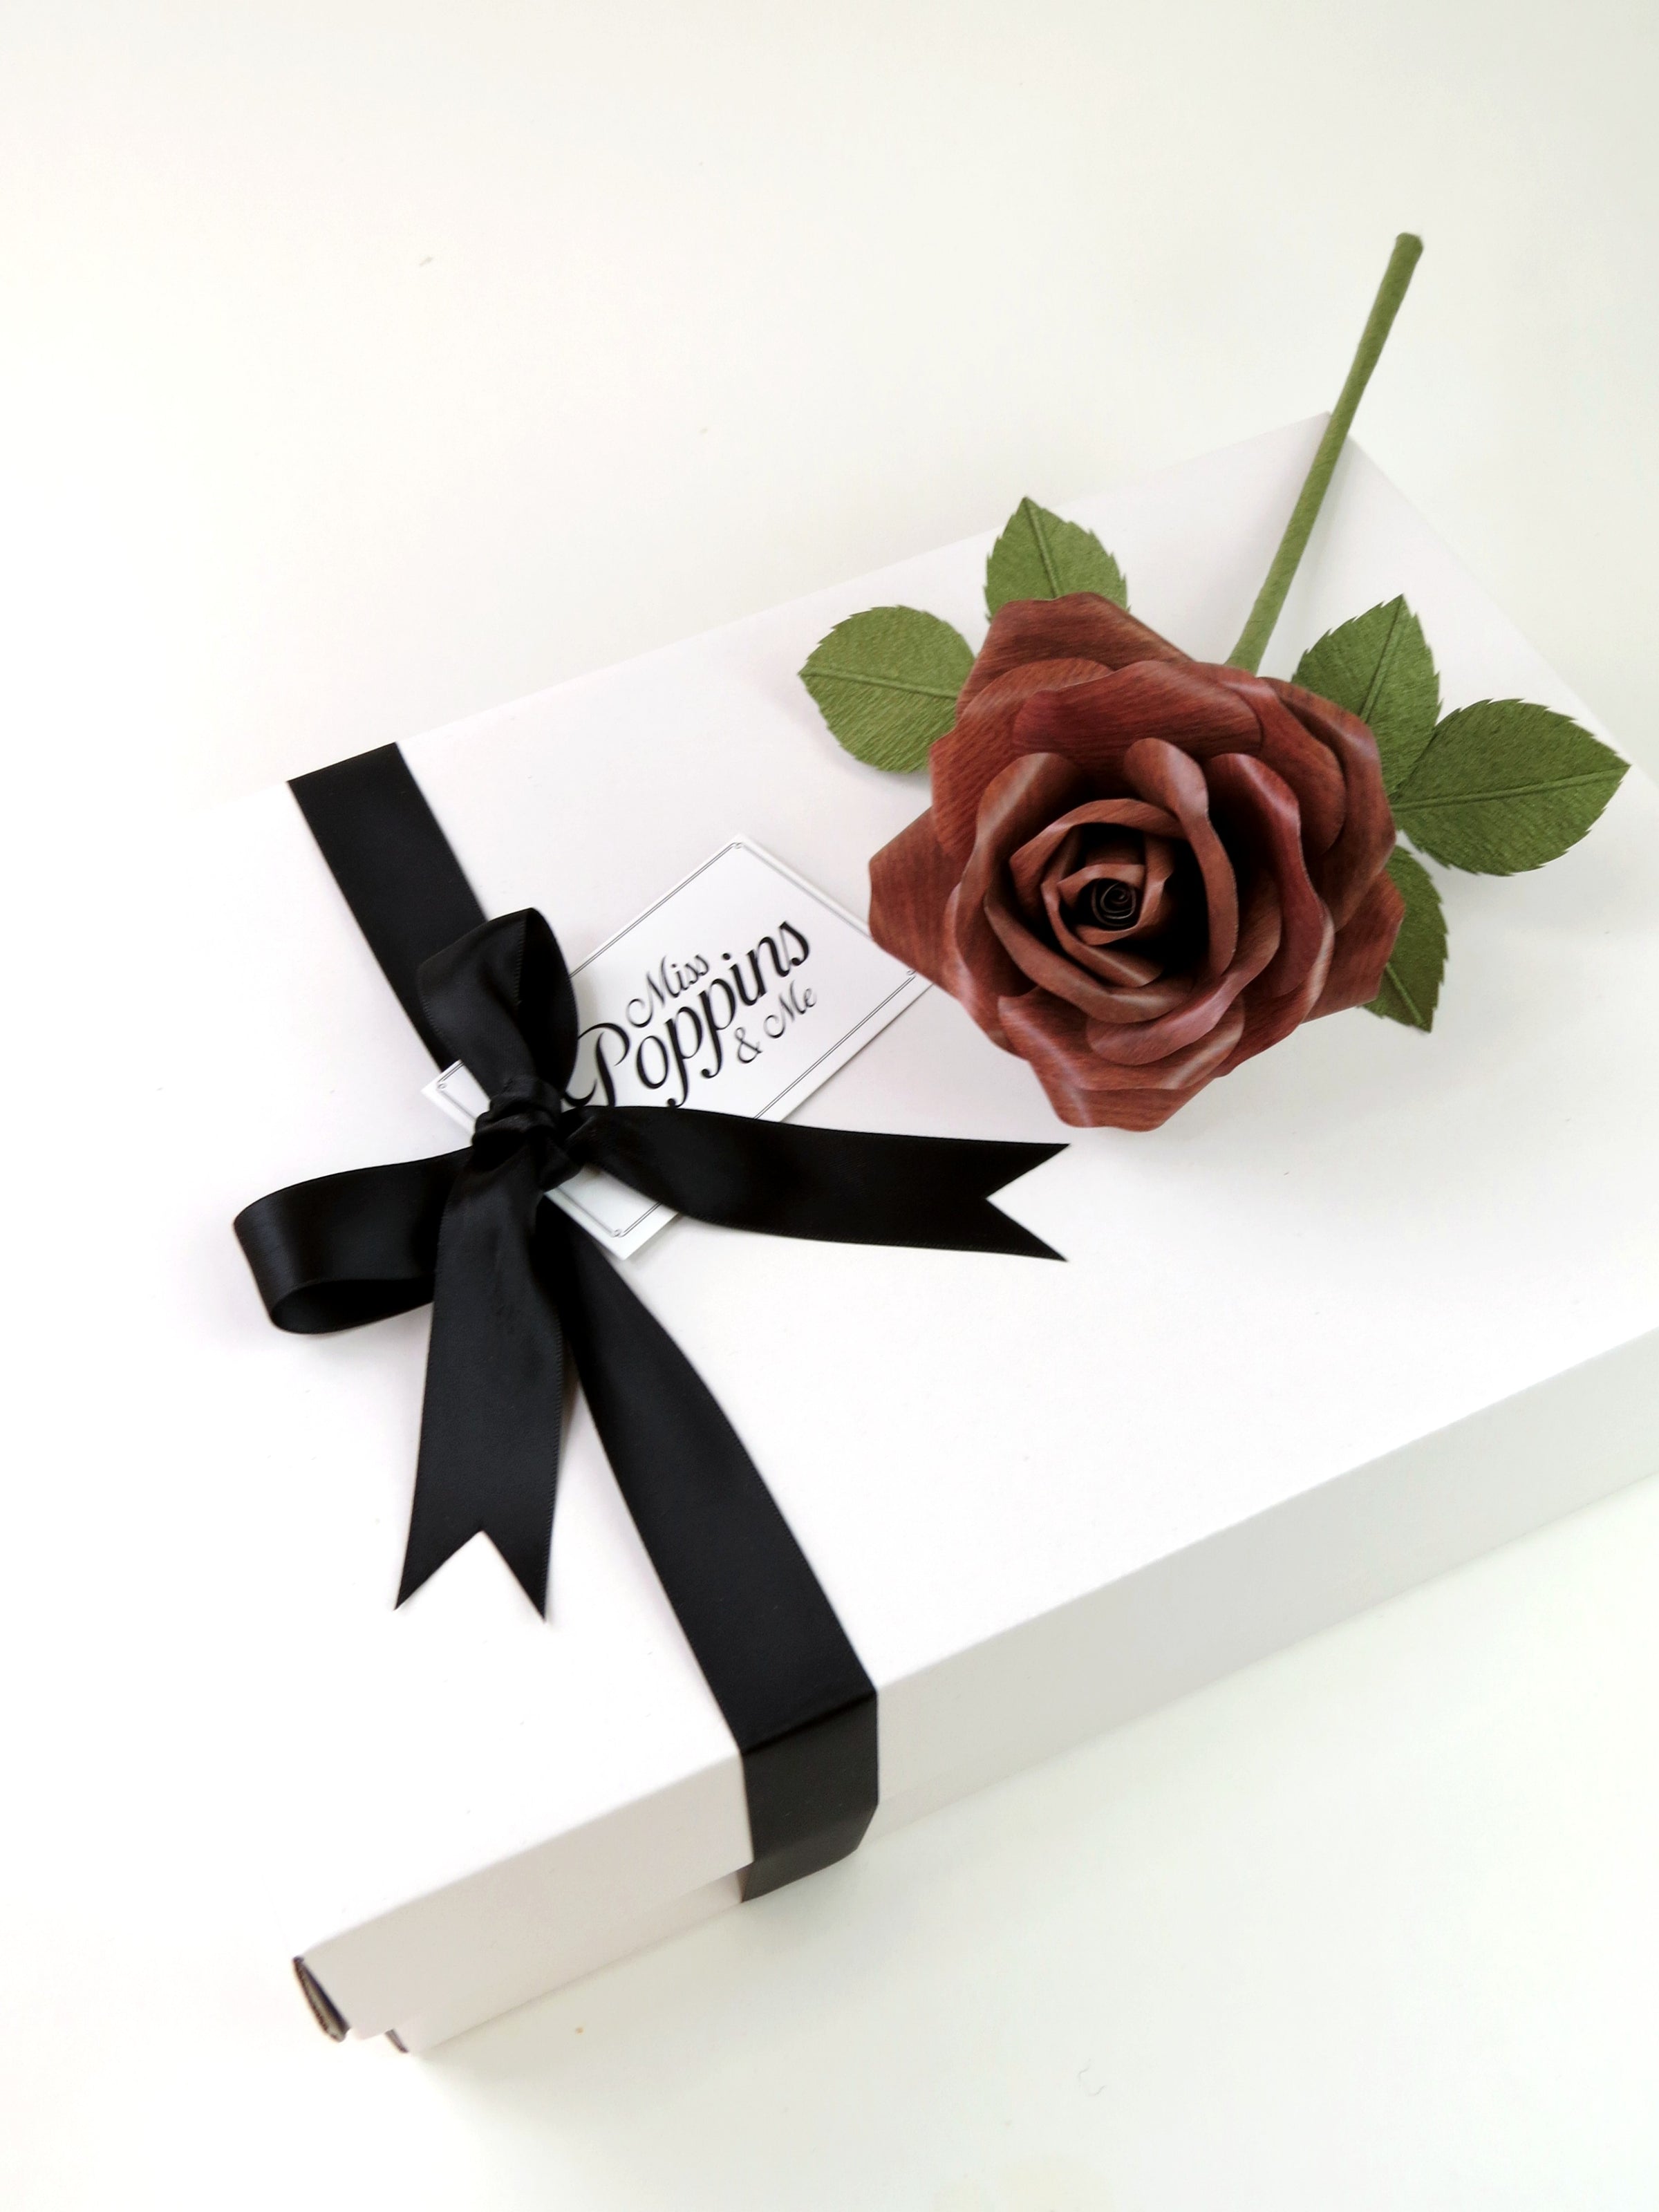 Dark wood grain paper rose lying on top of a luxury white gift box that has a black satin ribbon tied in a bow with a Miss Poppins and Me gift tag attached